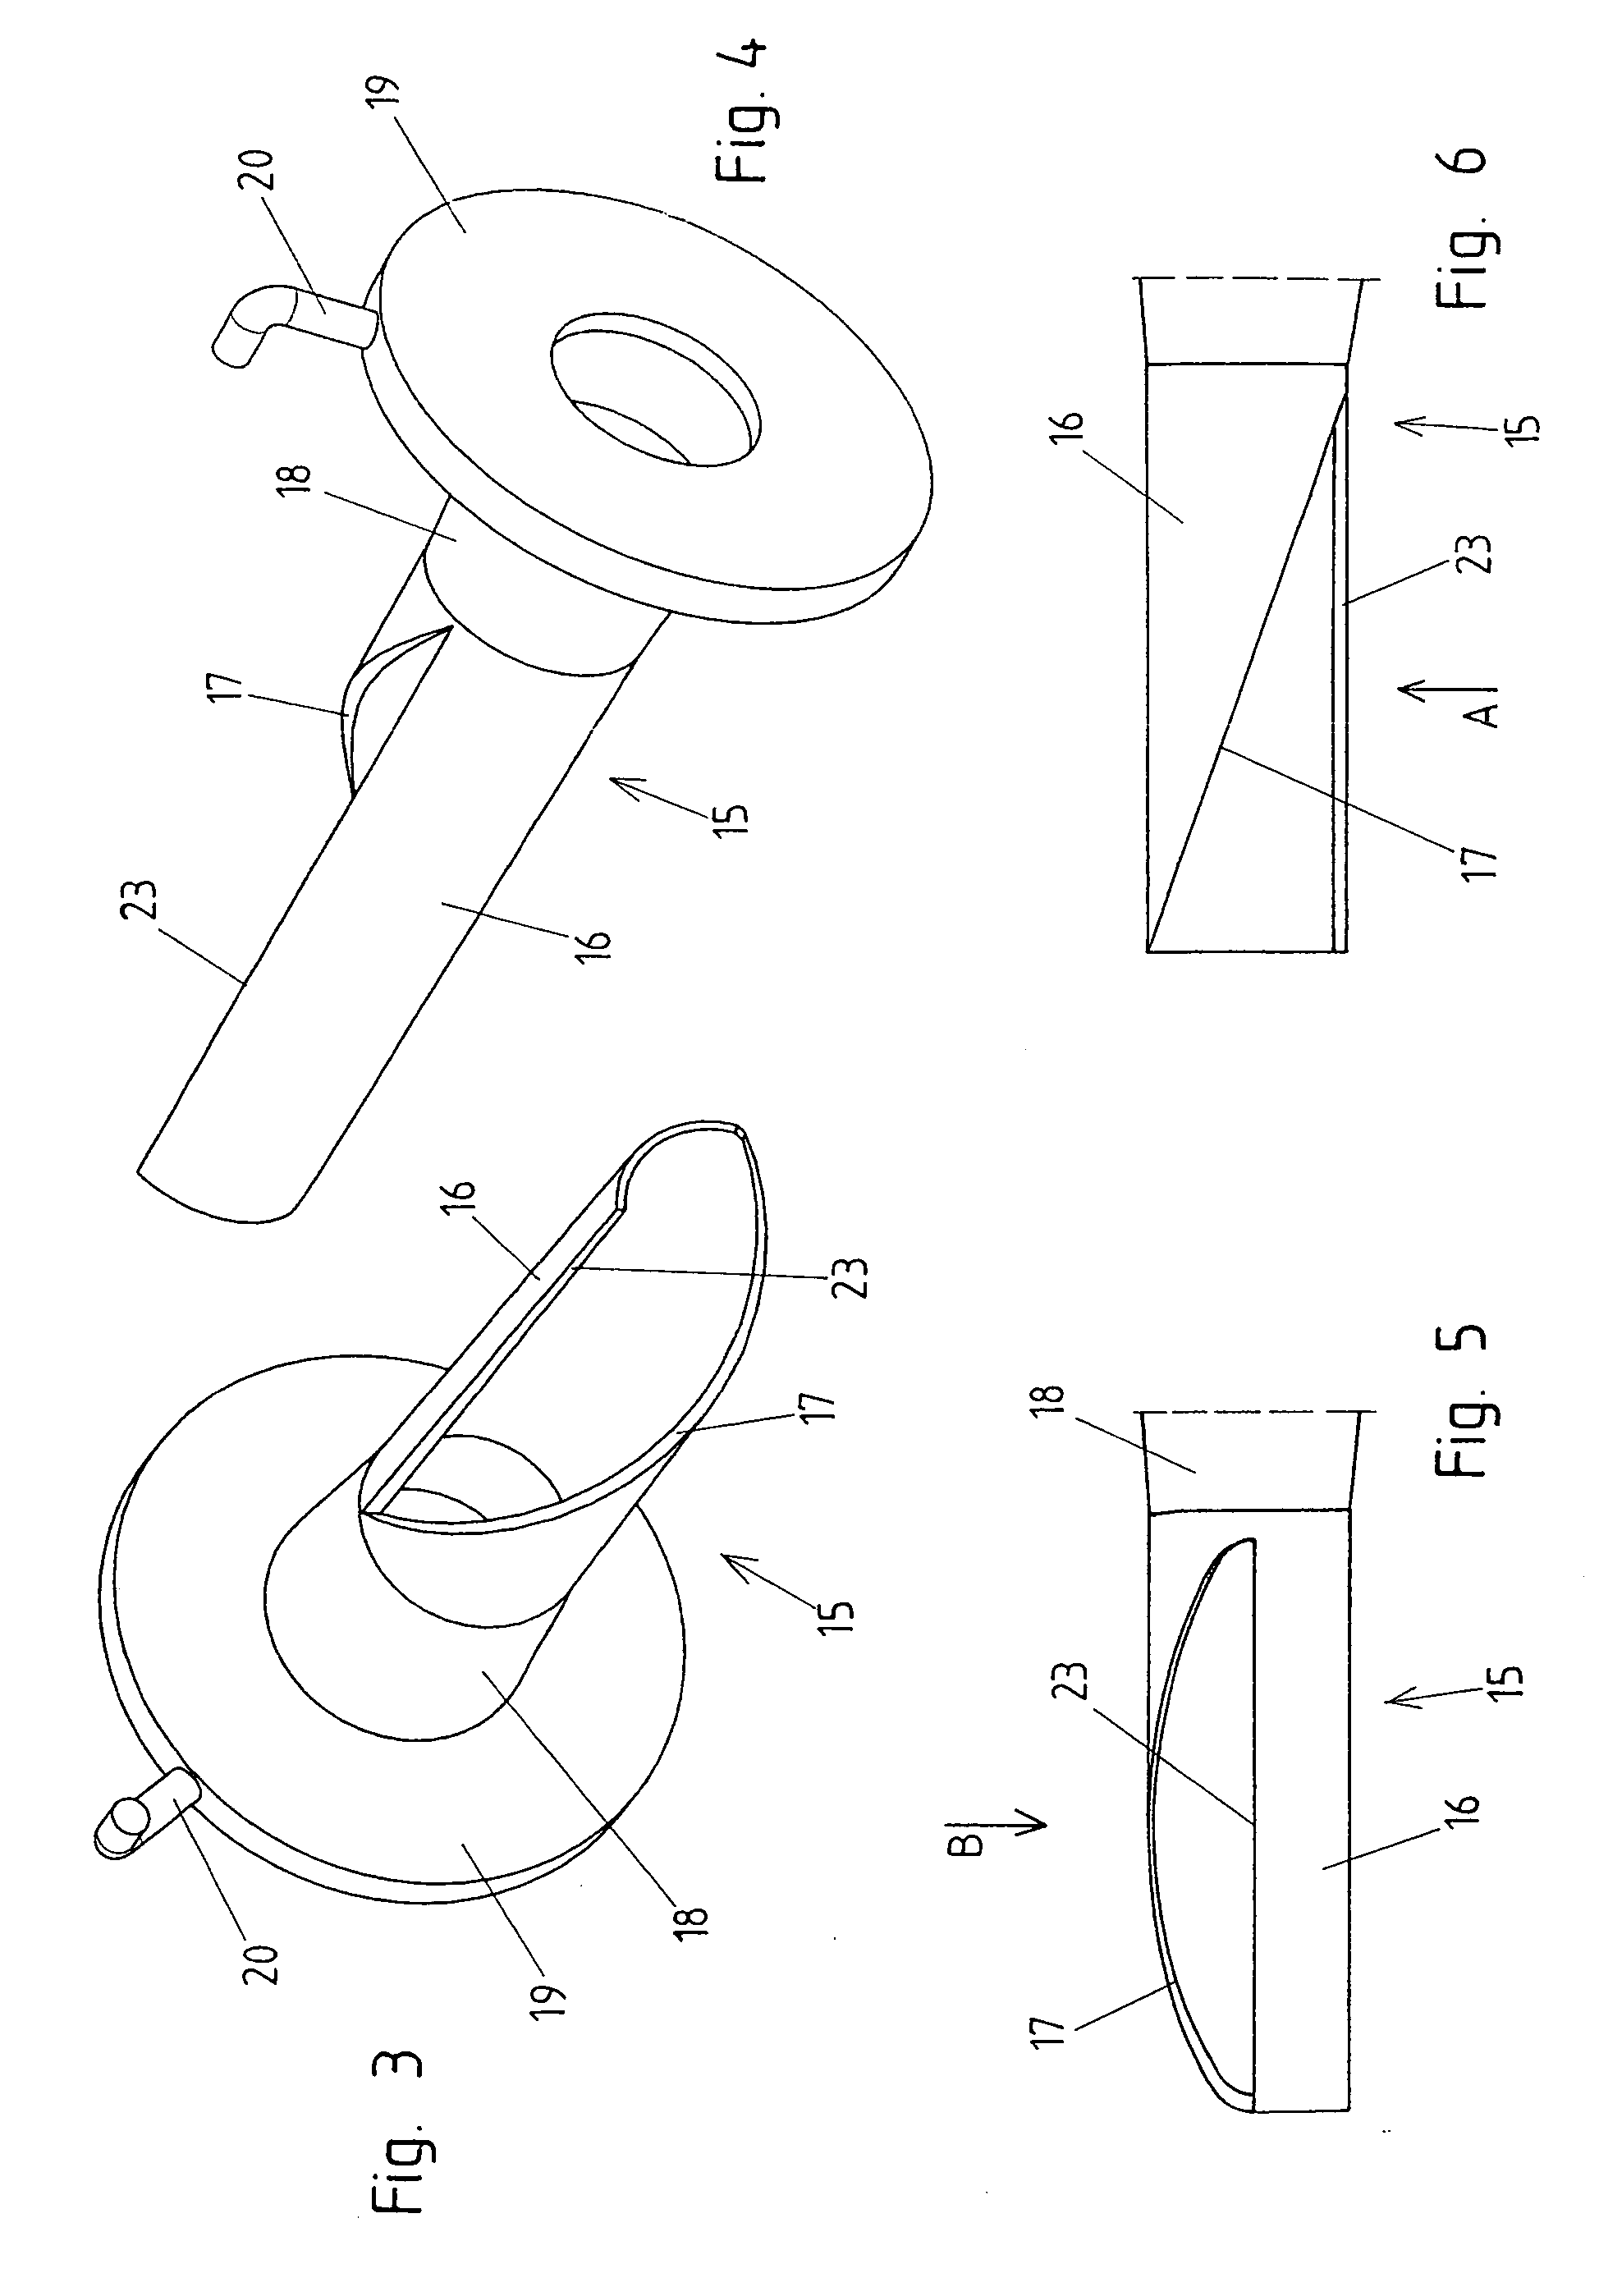 Instrument for use in the treatment of prolapsed hemorrhoids